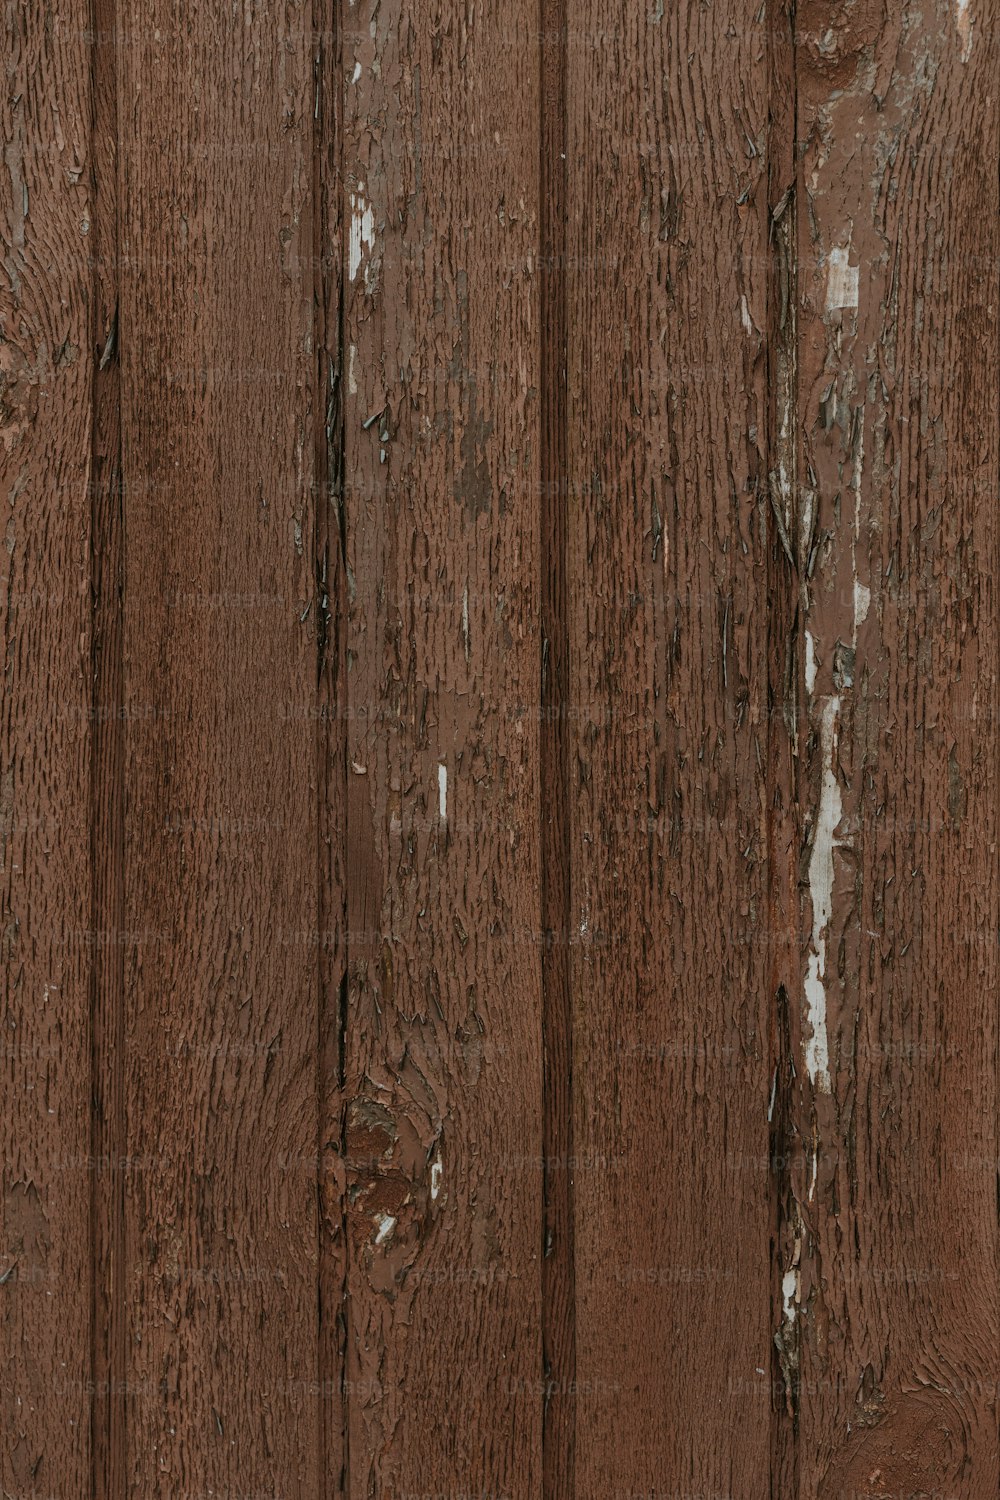 a brown wooden wall with peeling paint on it